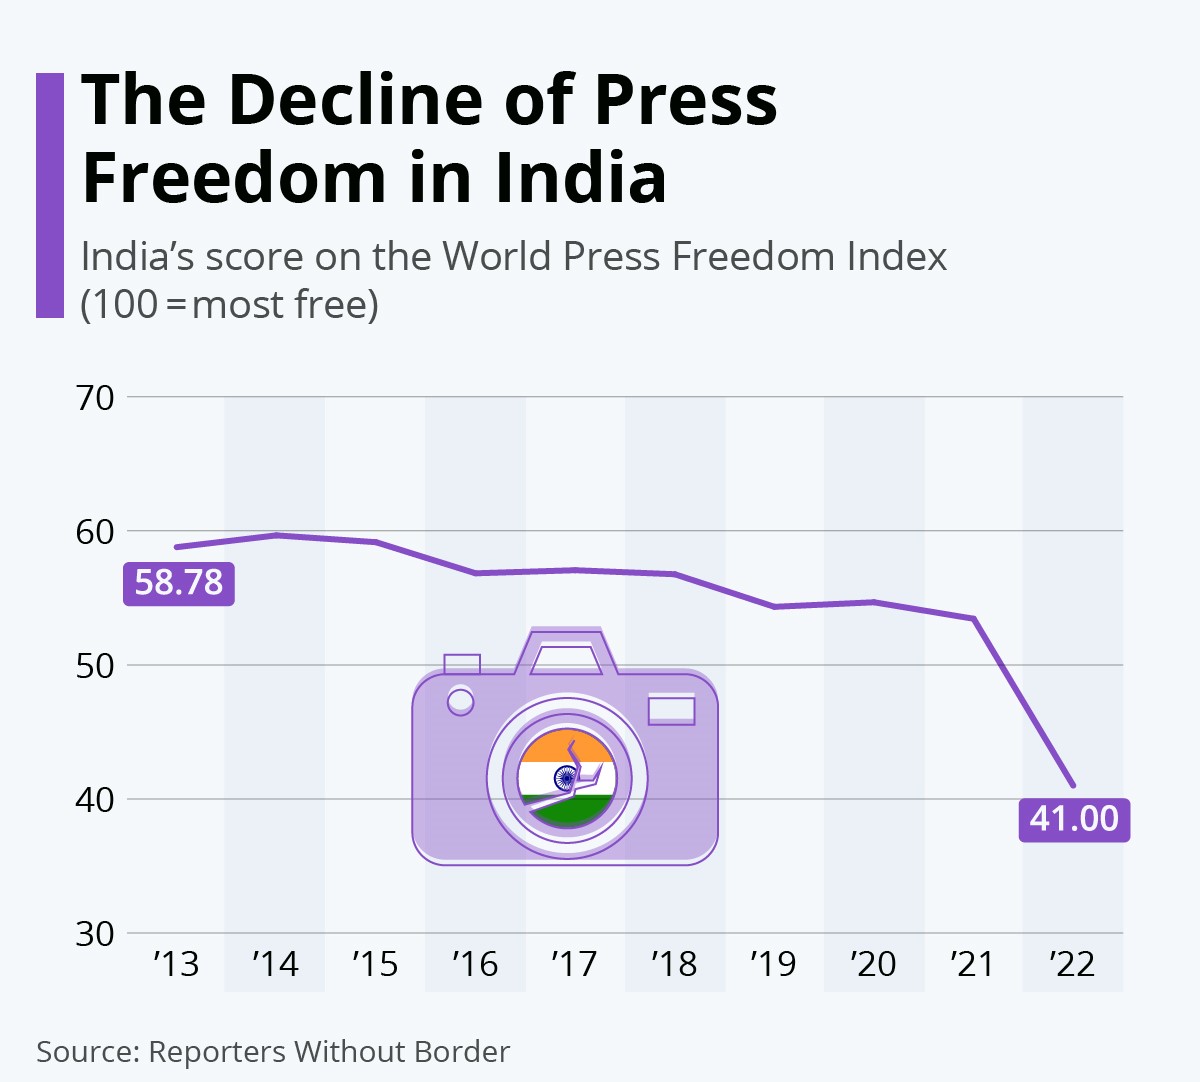 Inforgraphic_PressFreedom.jpeg - is a graph depicting the decline in Freedom of Press in India based on Reporters without Borders reports (Source: https://www.statista.com/chart/27698/press-freedom-india/)